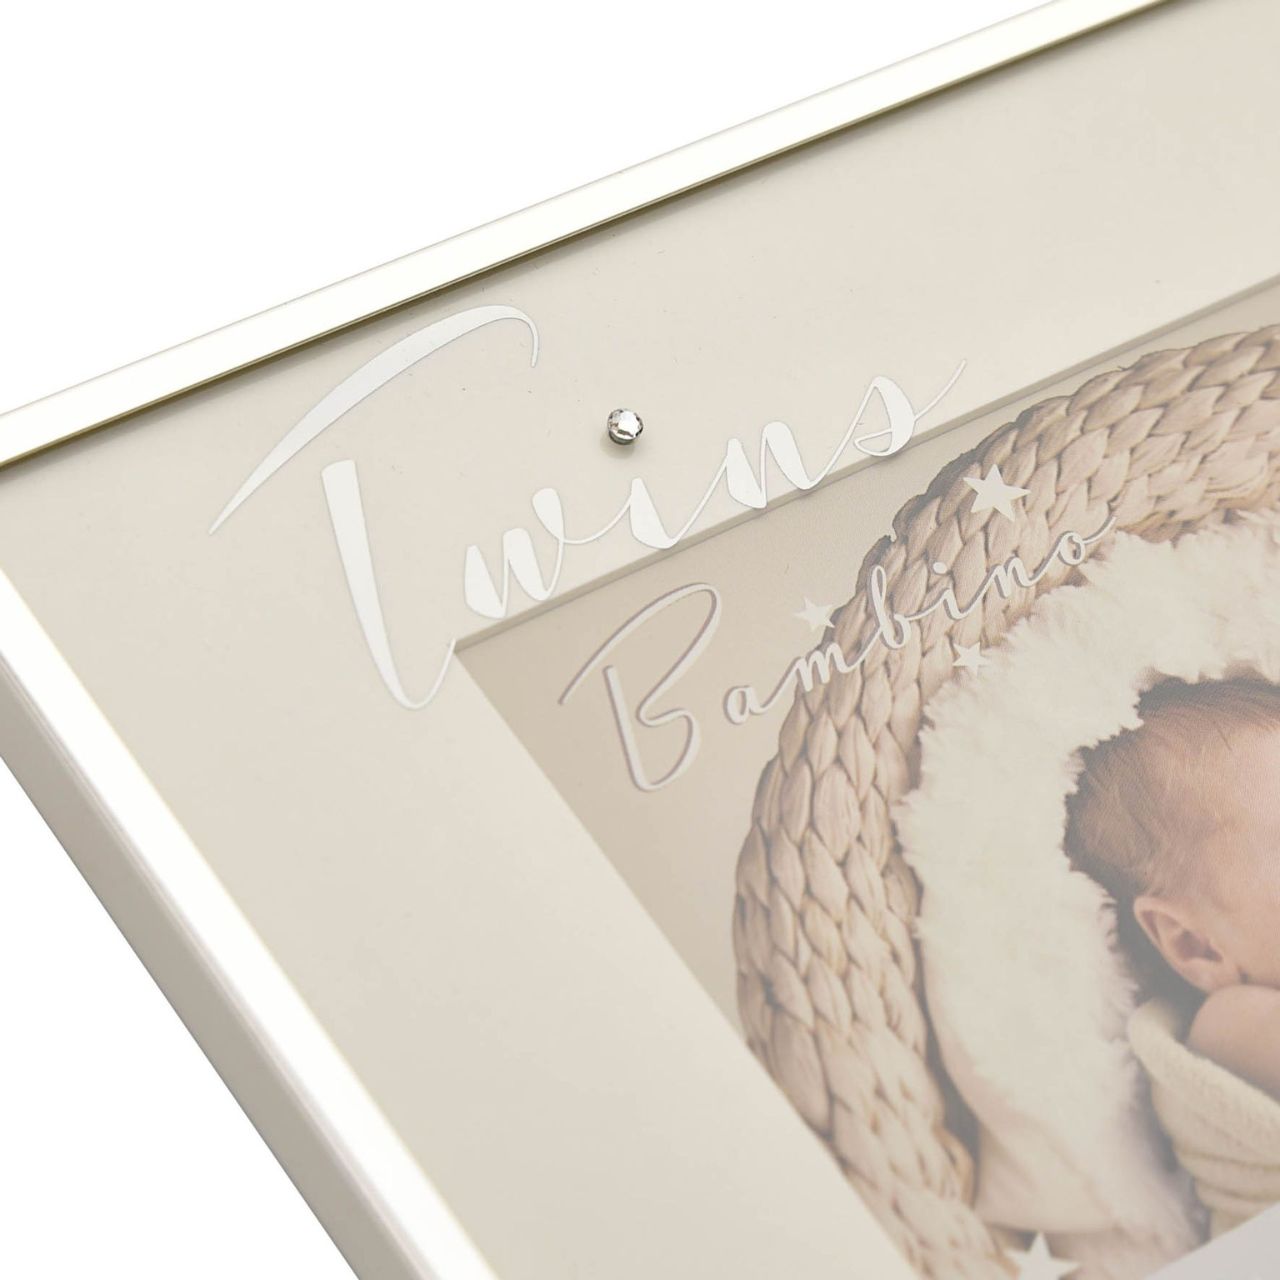 Twins Silver Plated Photo Frame - 6" x 4"  A silver plated Twins photo frame.  This affectionately personalised frame is a heart-warming gift for the parents of new born twins.